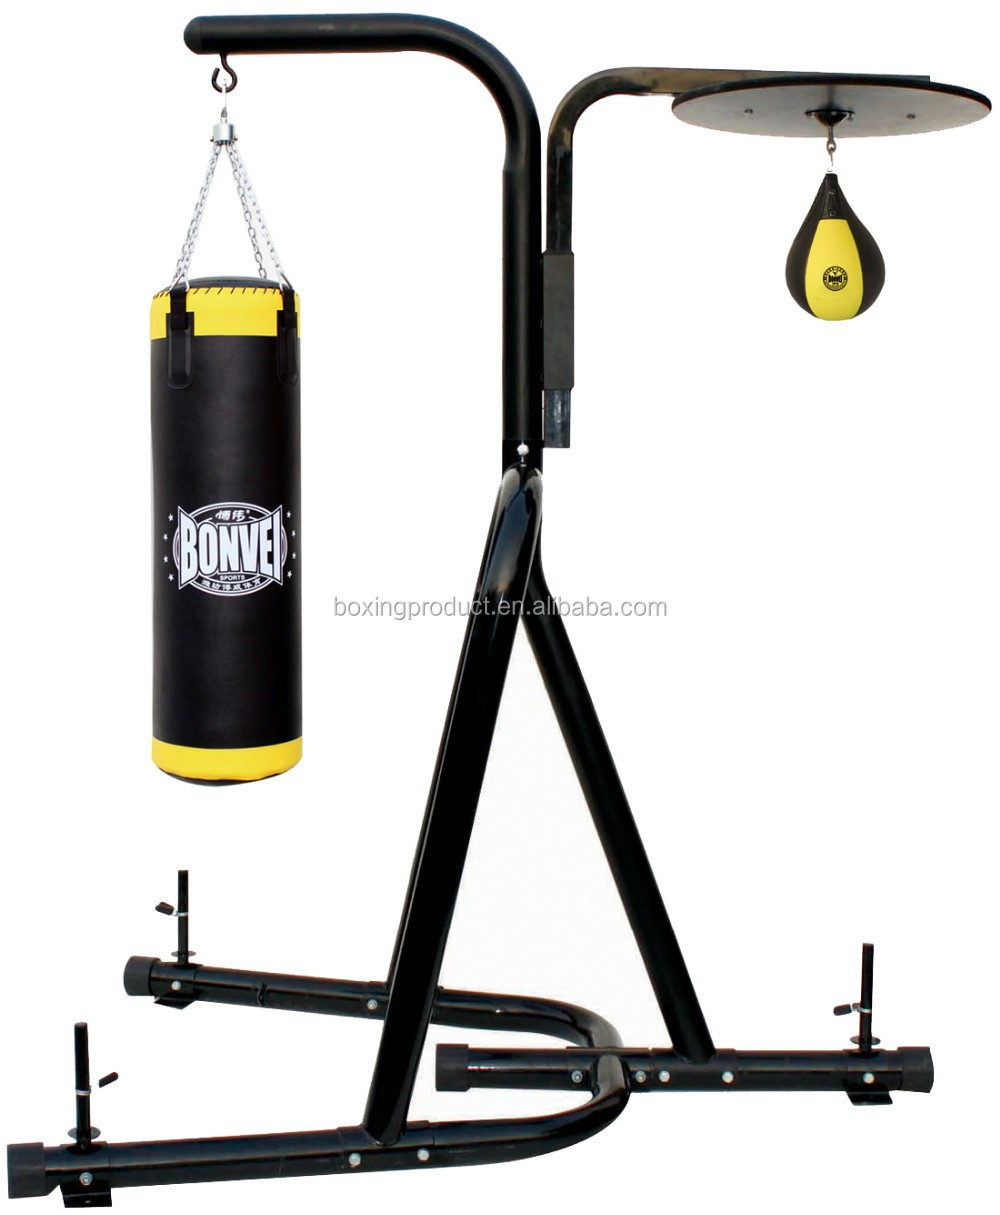 Factory Price Boxing Heavy Bag & Speed Bag Stand For Sale - Buy Boxing Heavy Bag & Speed Bag ...